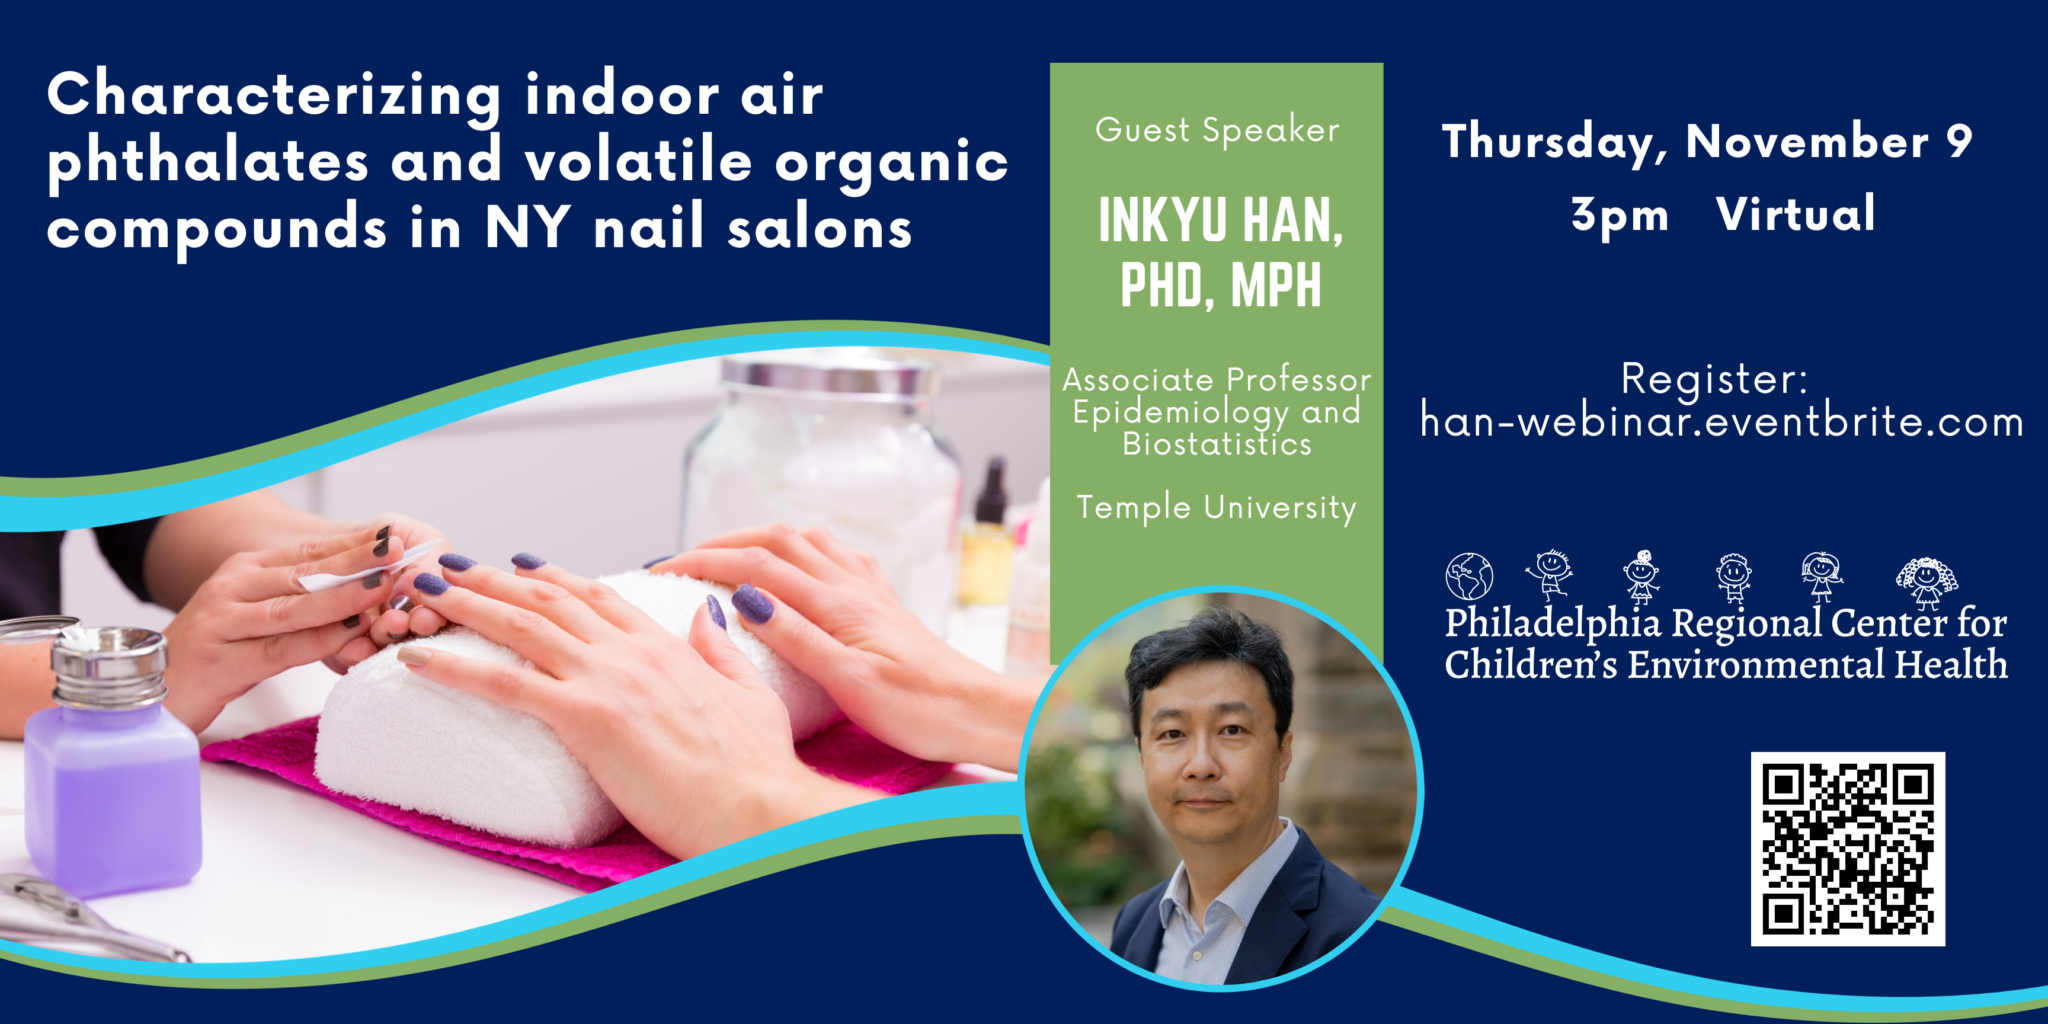 Characterizing indoor air phthalates and volatile organic compounds in NY nail salons 